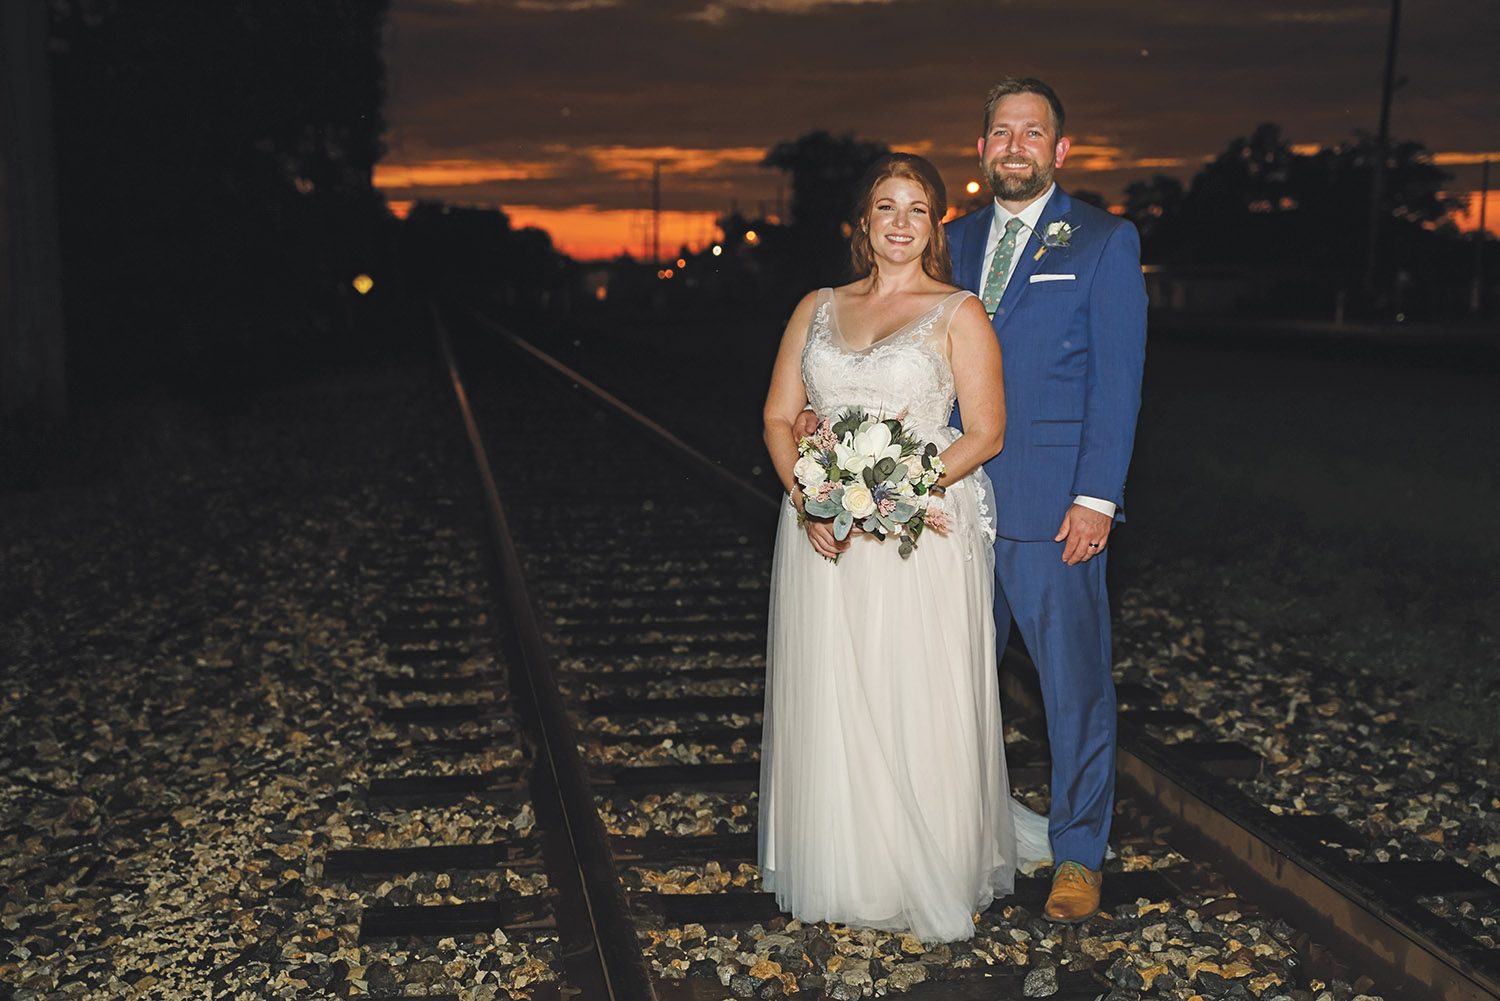 Allison and Todd pose on the train tracks near The Crossing